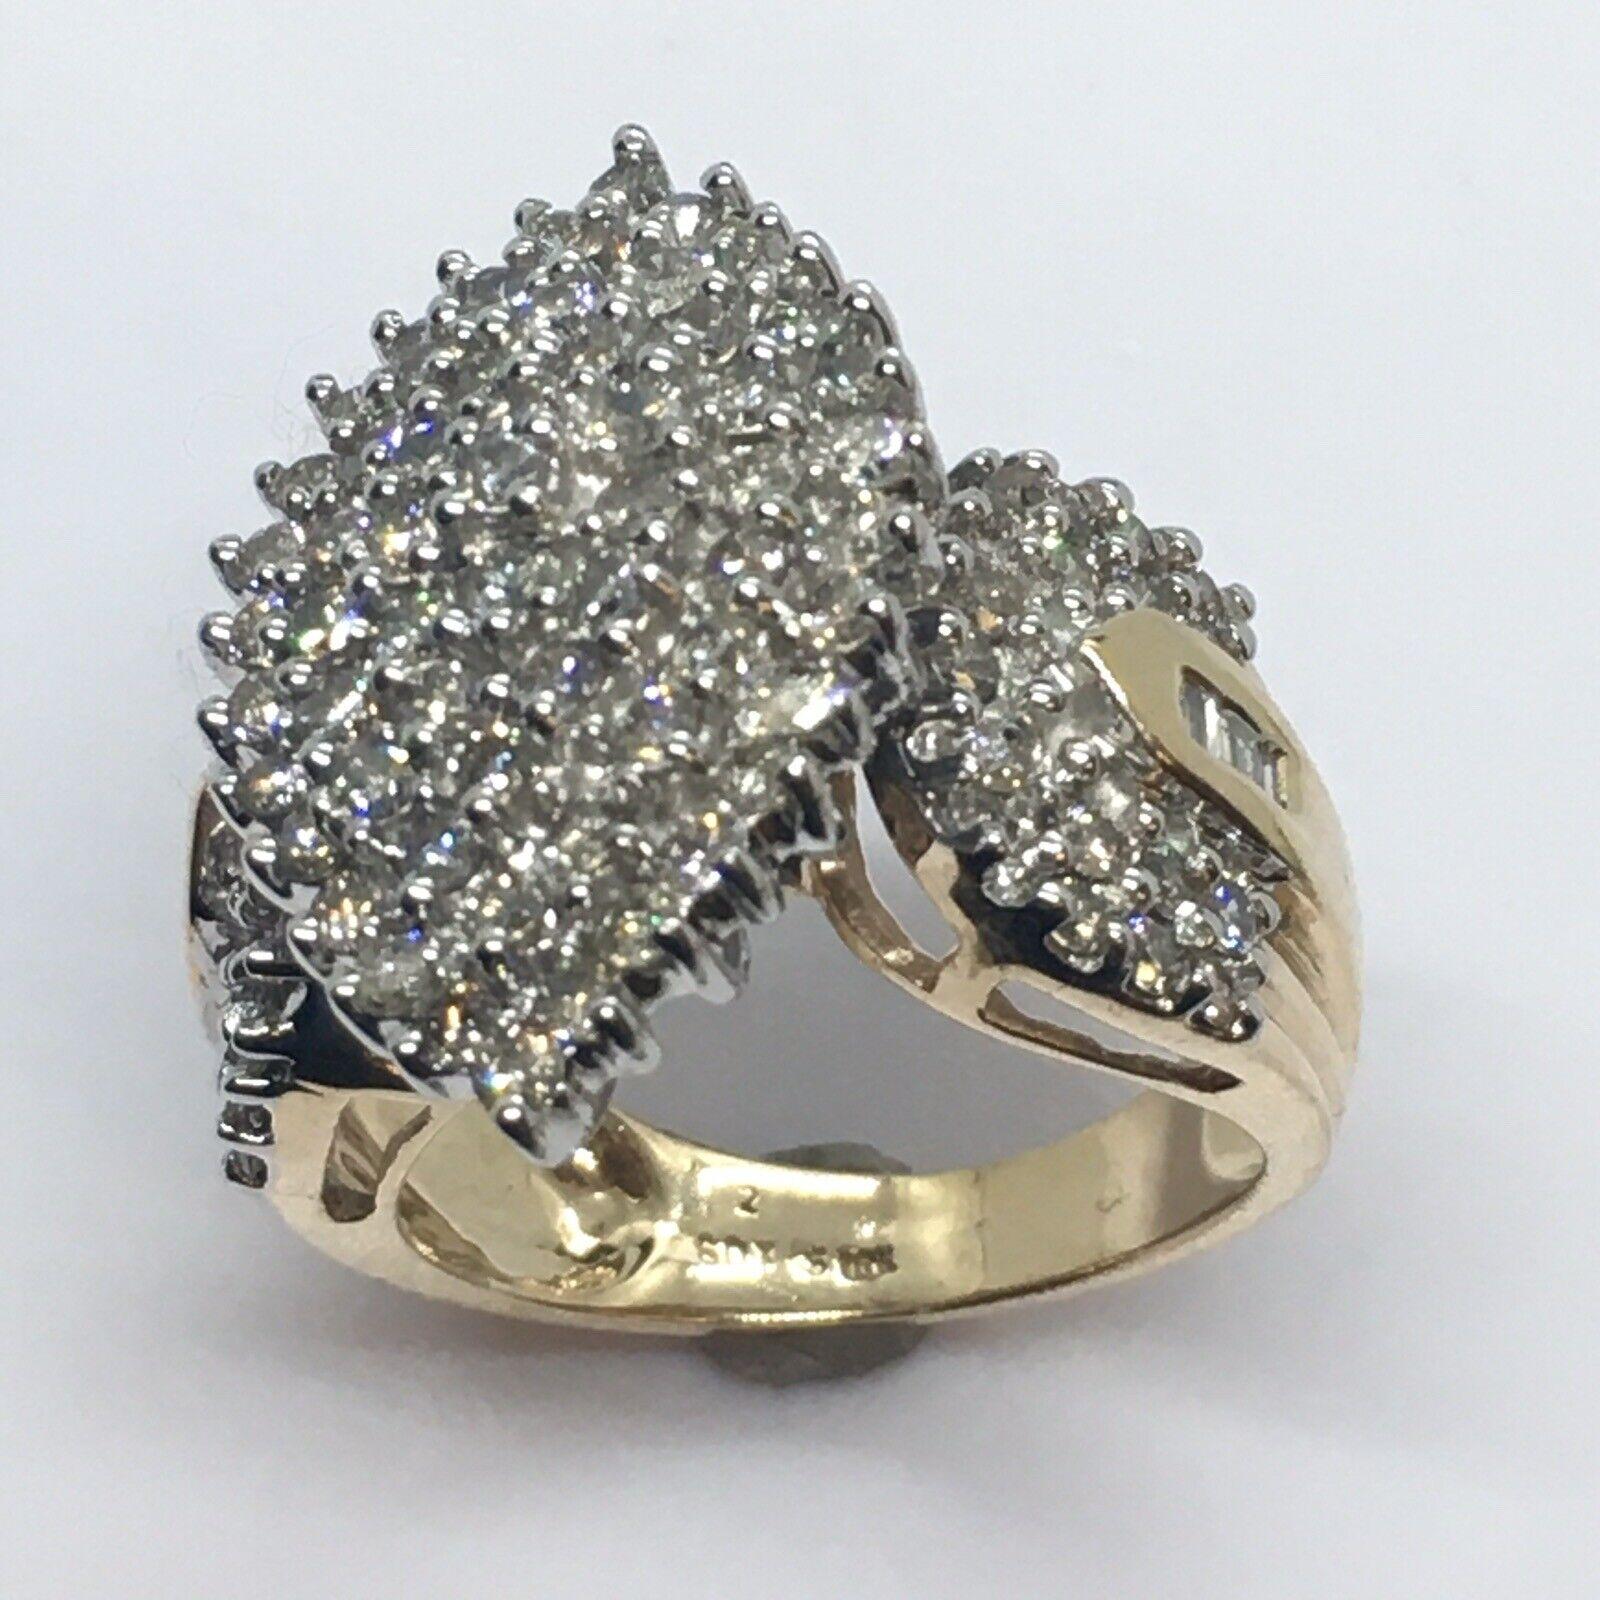 Round Cut 10 k Yellow Gold White Gold Top 2.5 Carat Total Diamond Cluster Ring Size 7.25 For Sale